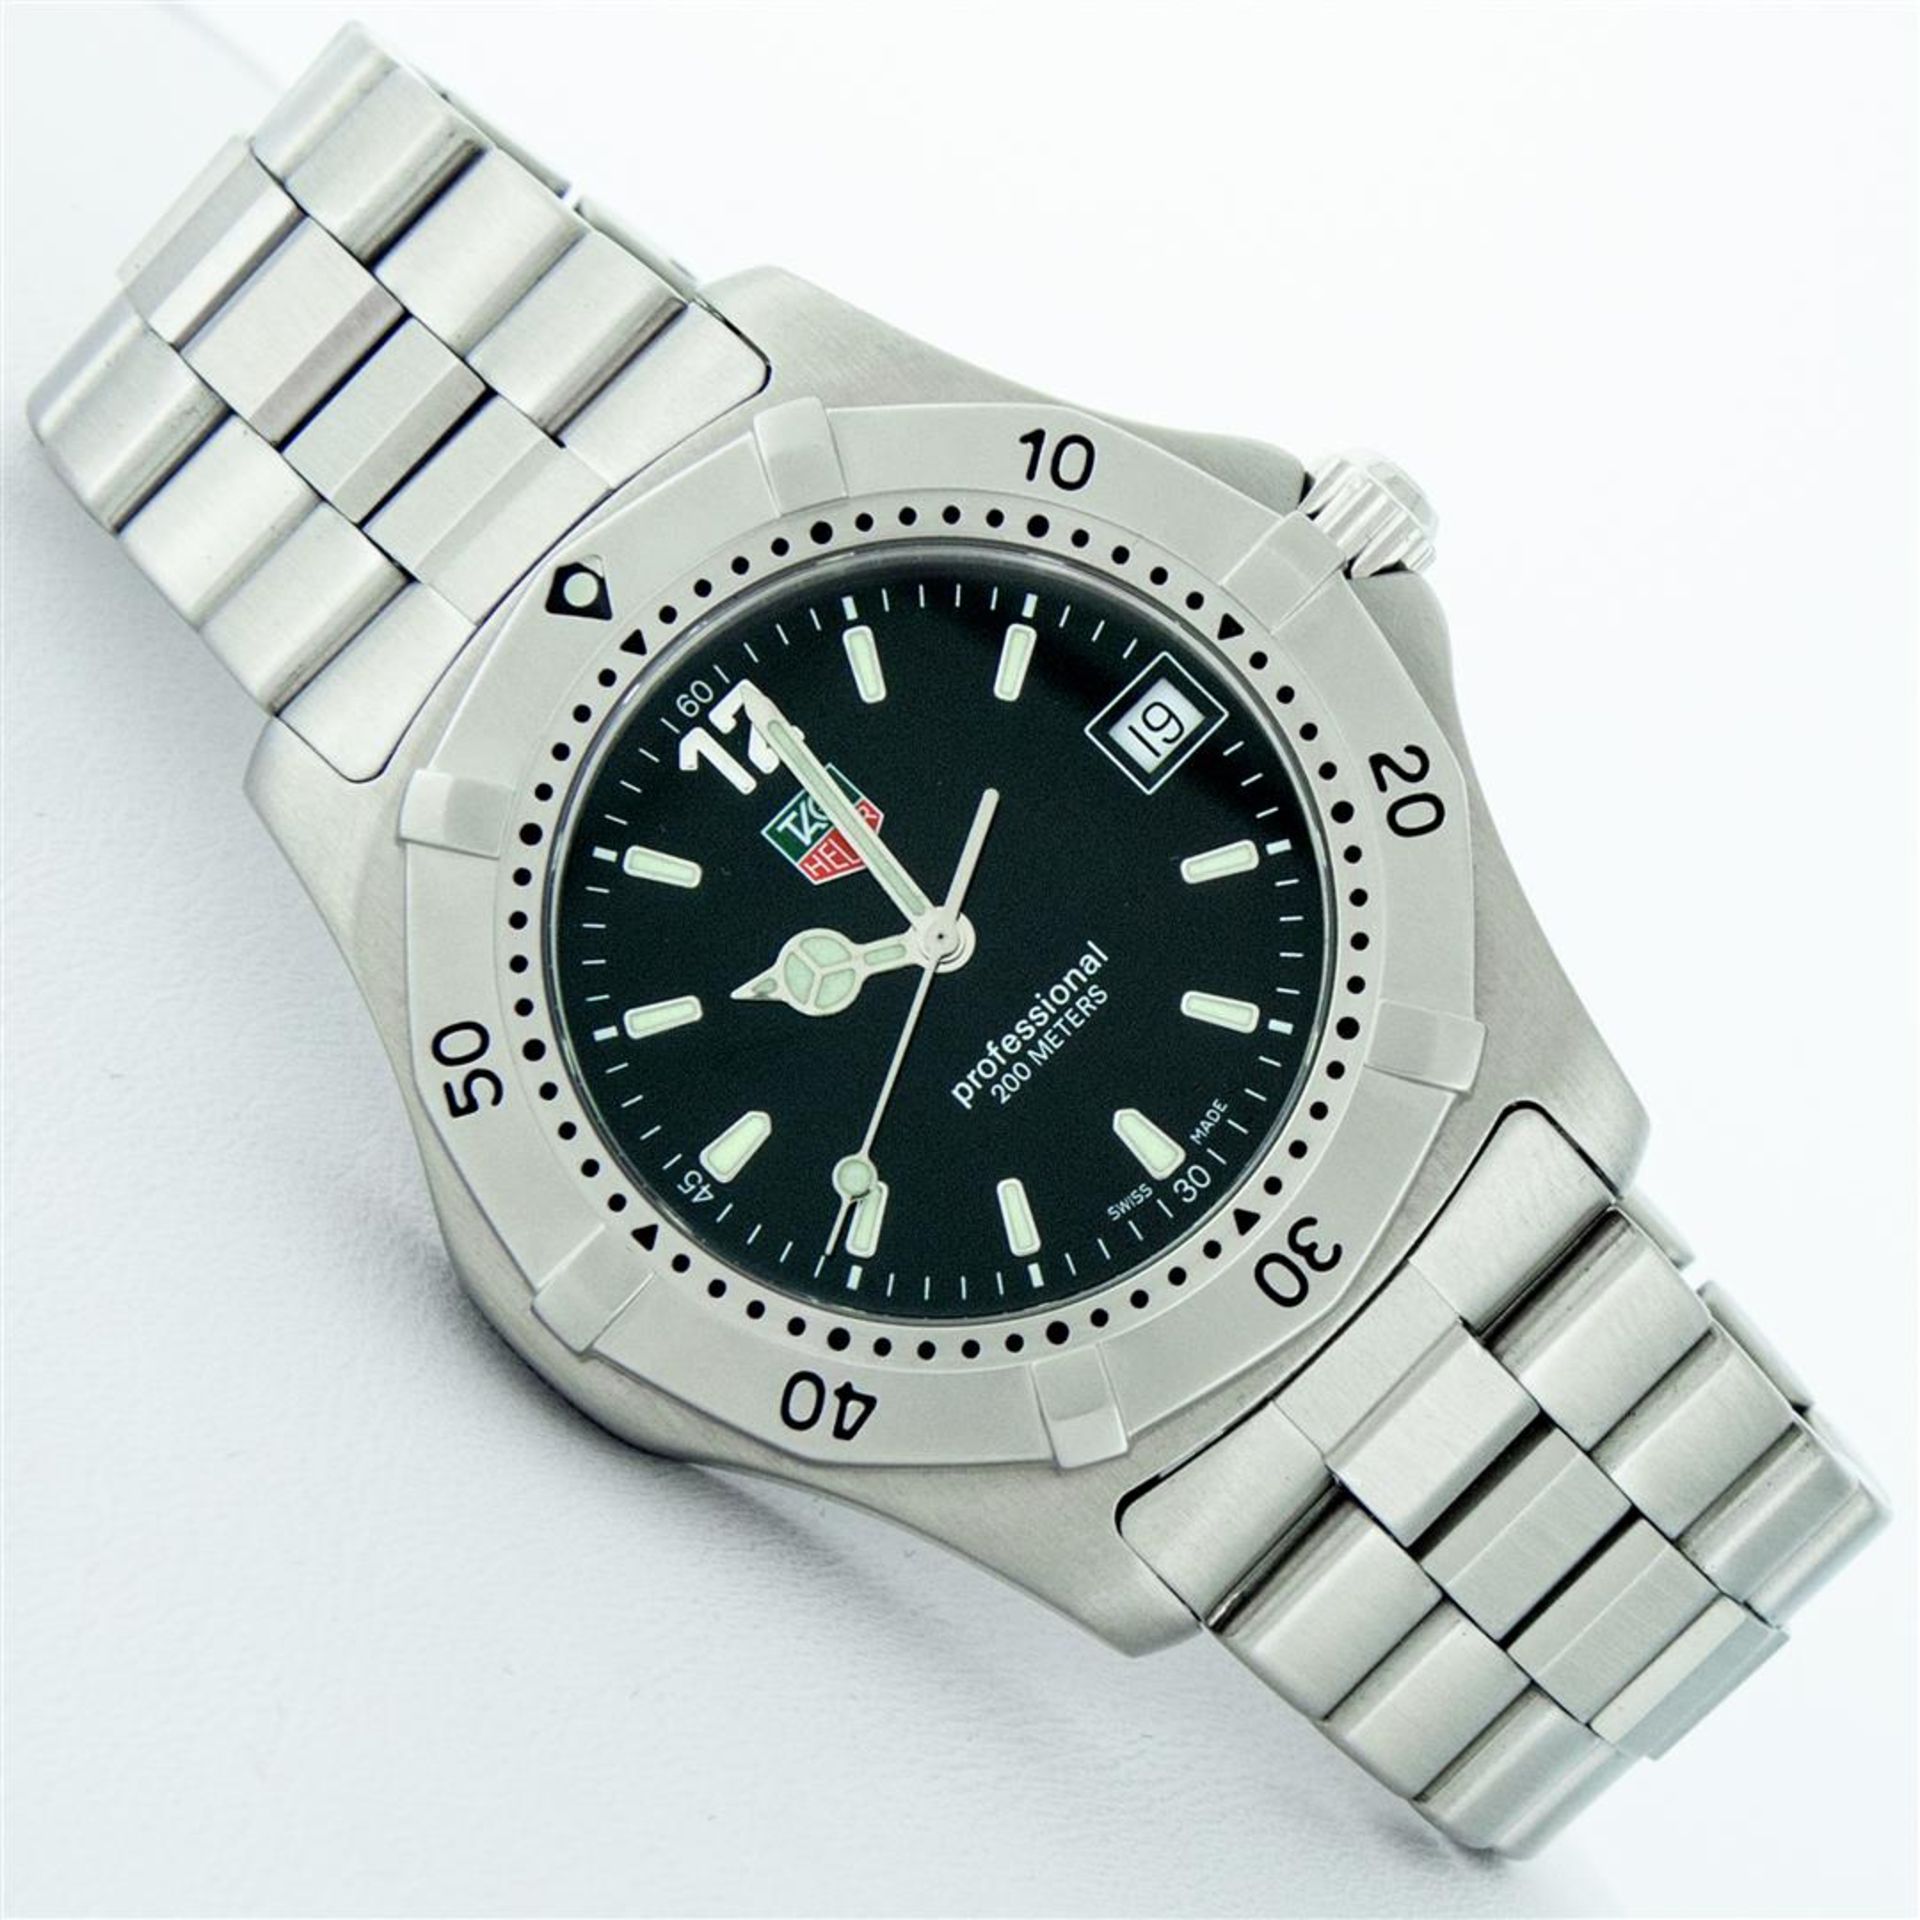 Tag Heuer Unisex Stainless Steel Black Dial 37mm Professional Series Wristwatch - Image 3 of 9